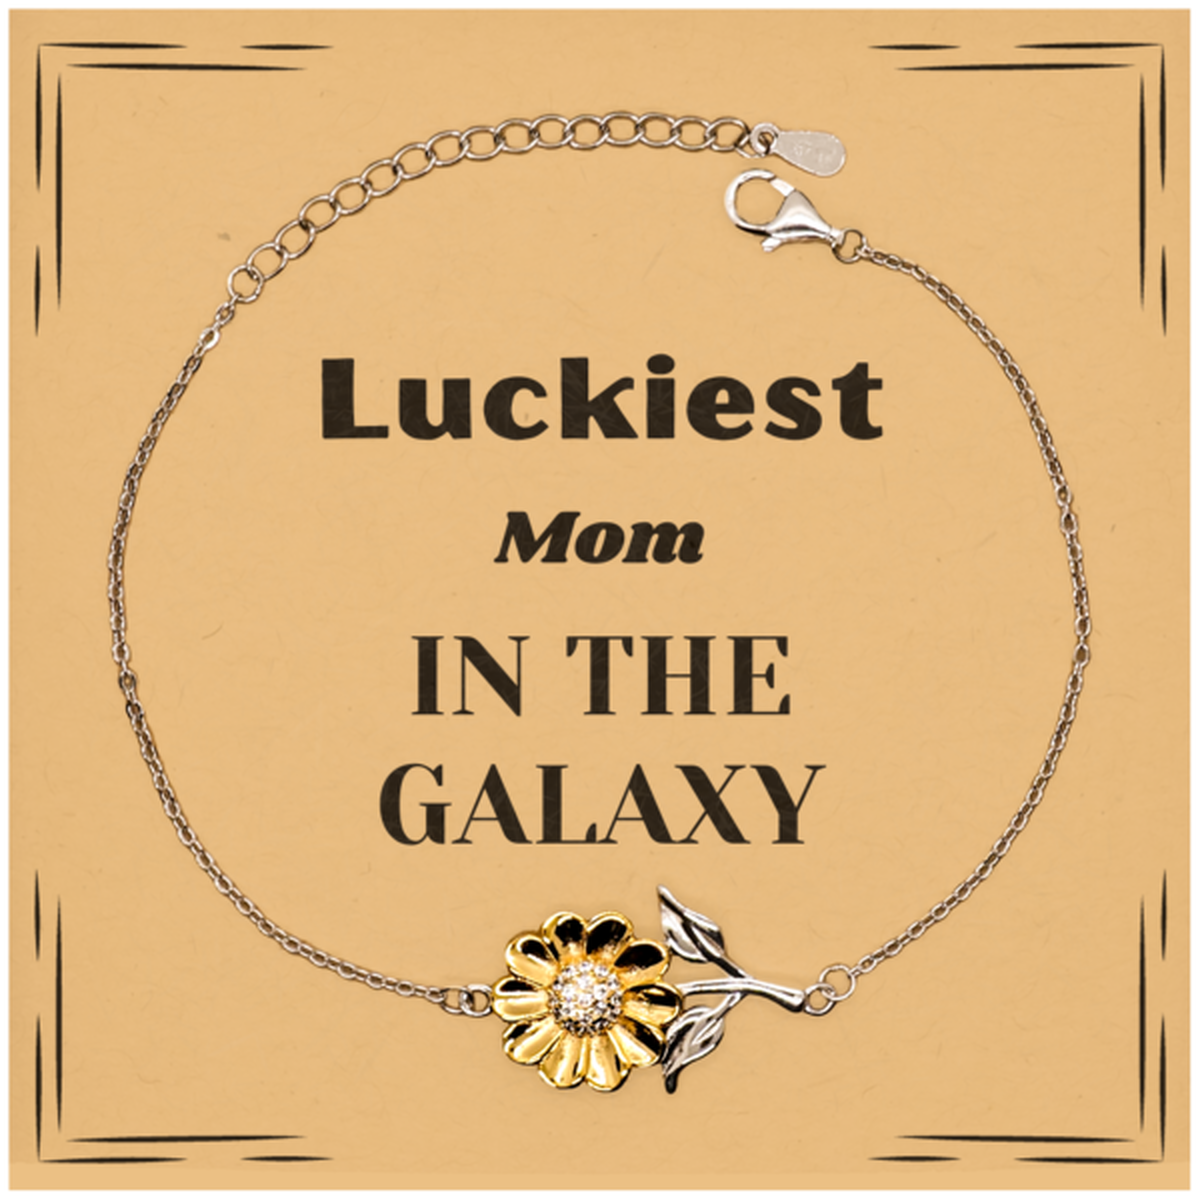 Luckiest Mom in the Galaxy, To My Mom Message Card Gifts, Christmas Mom Sunflower Bracelet Gifts, X-mas Birthday Unique Gifts For Mom Men Women